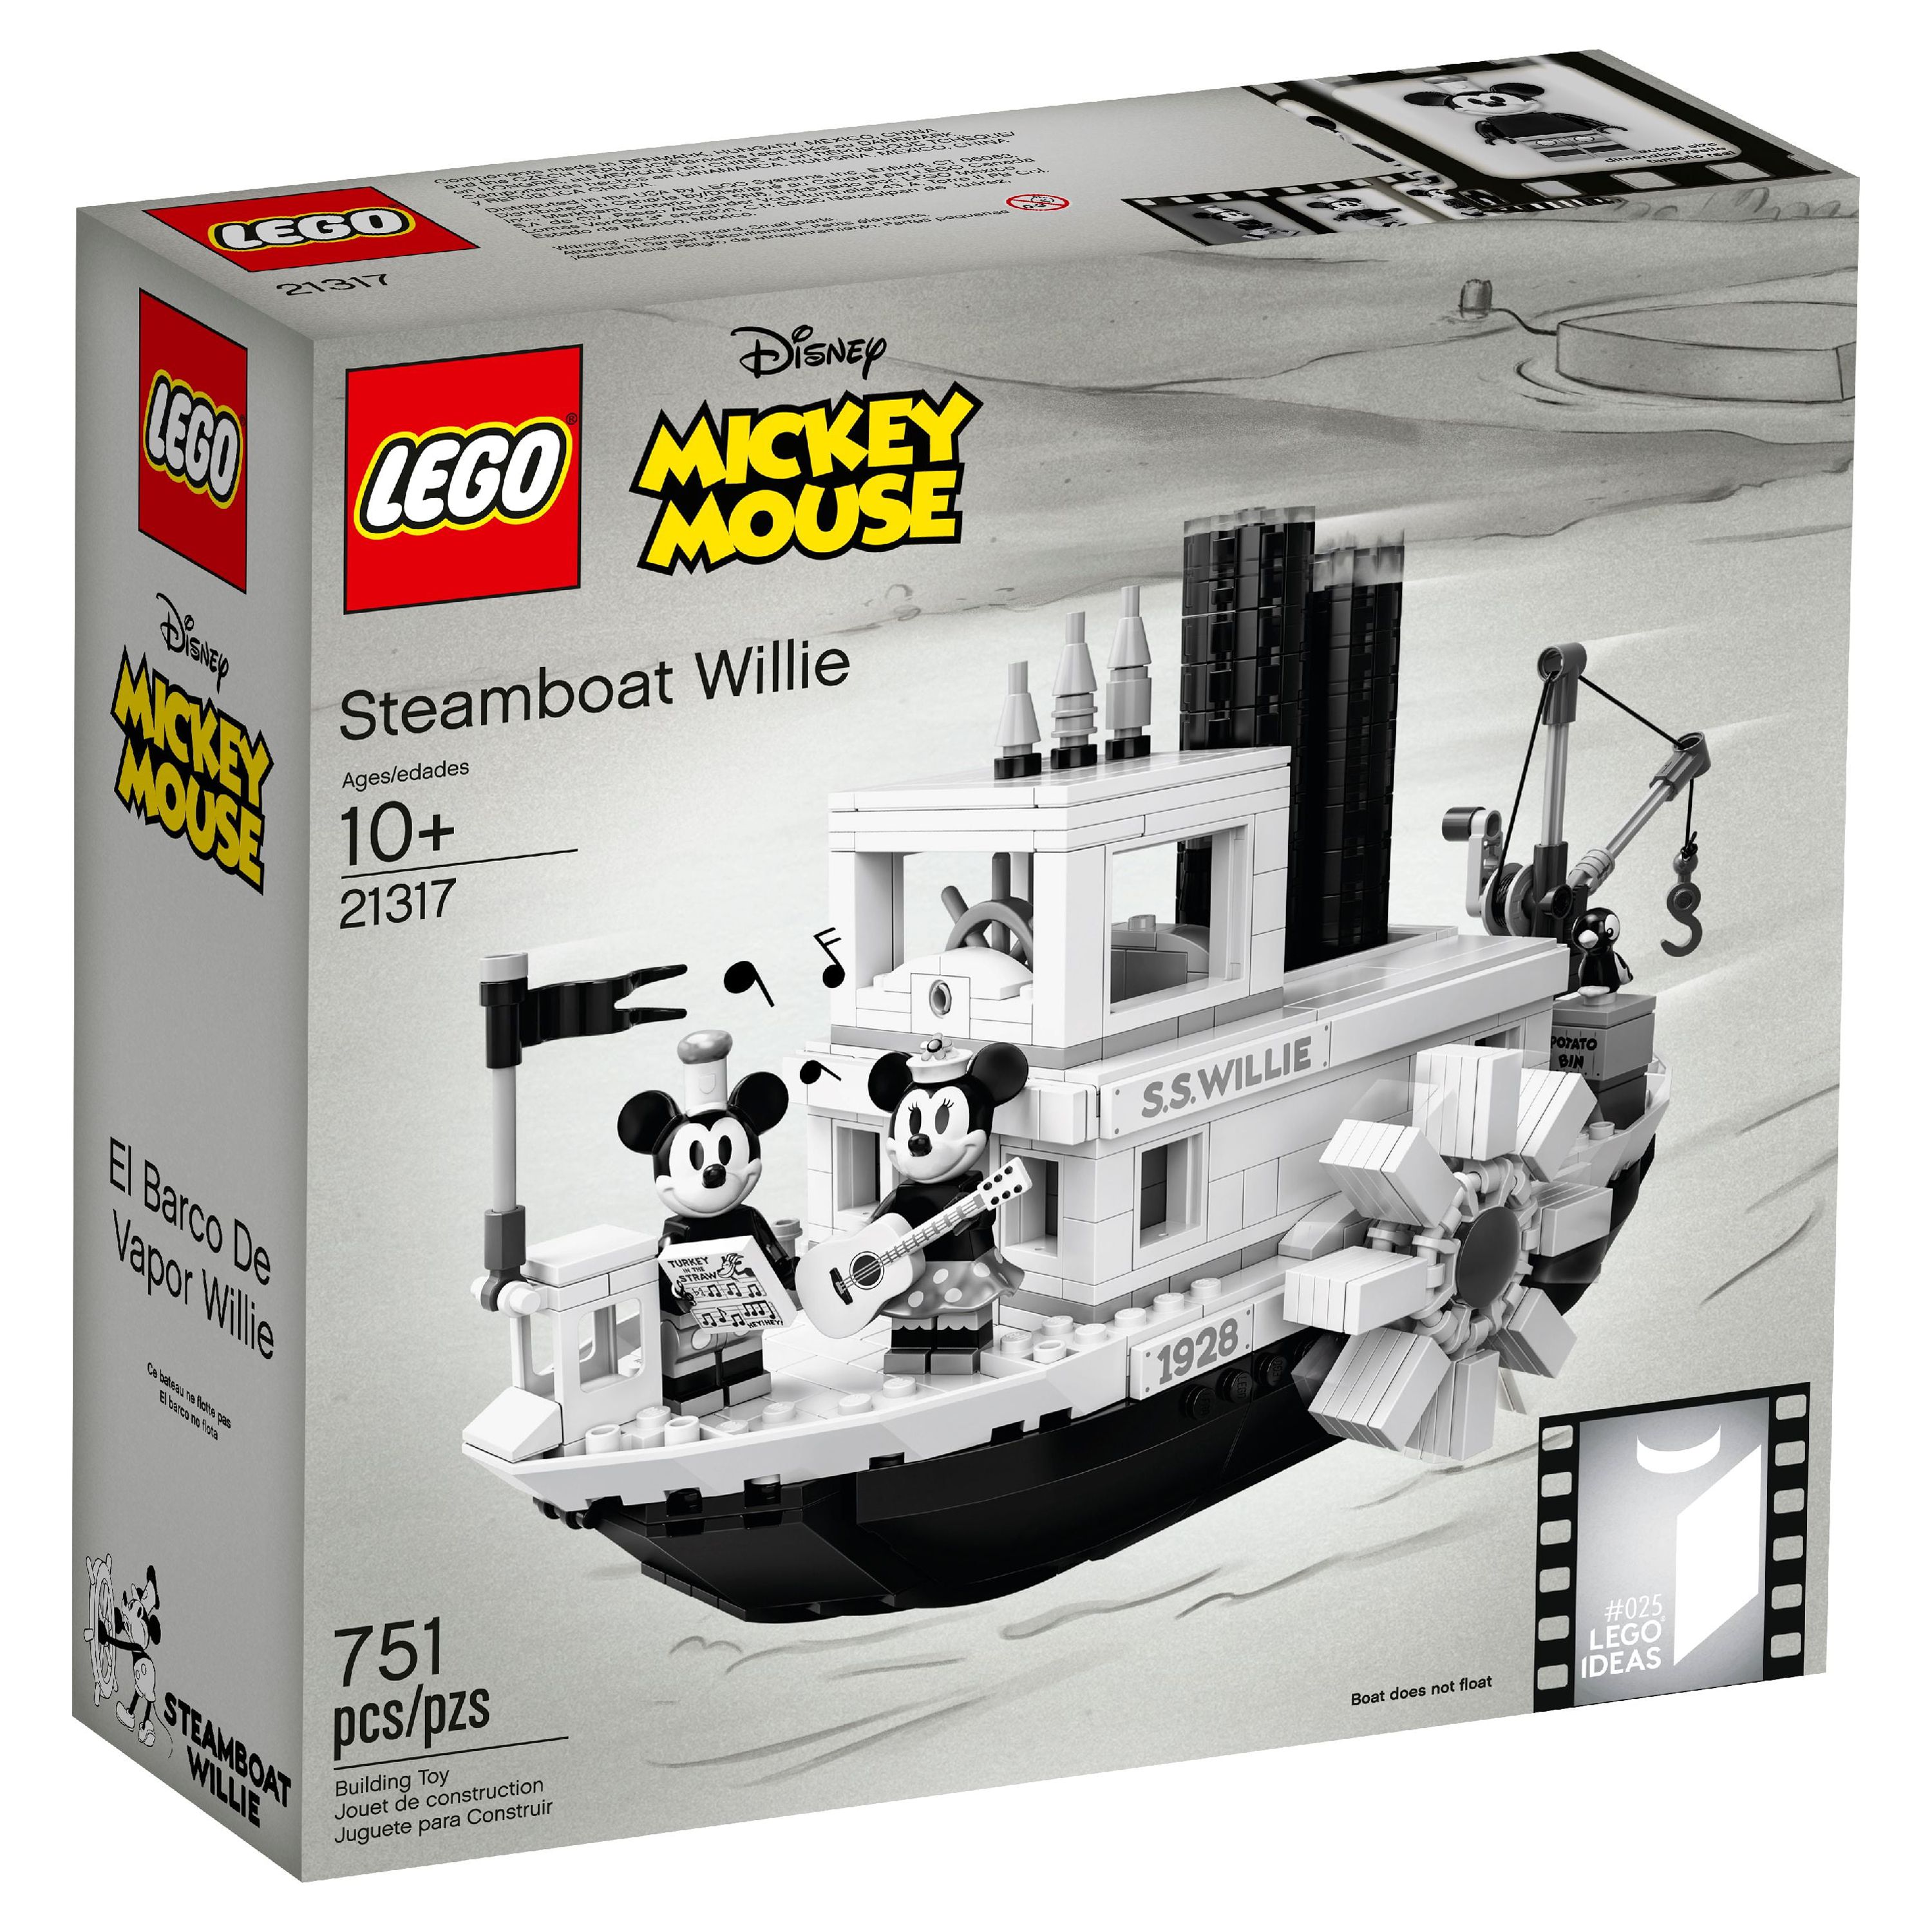 LEGO Ideas Steamboat Willie 21317 - image 4 of 7